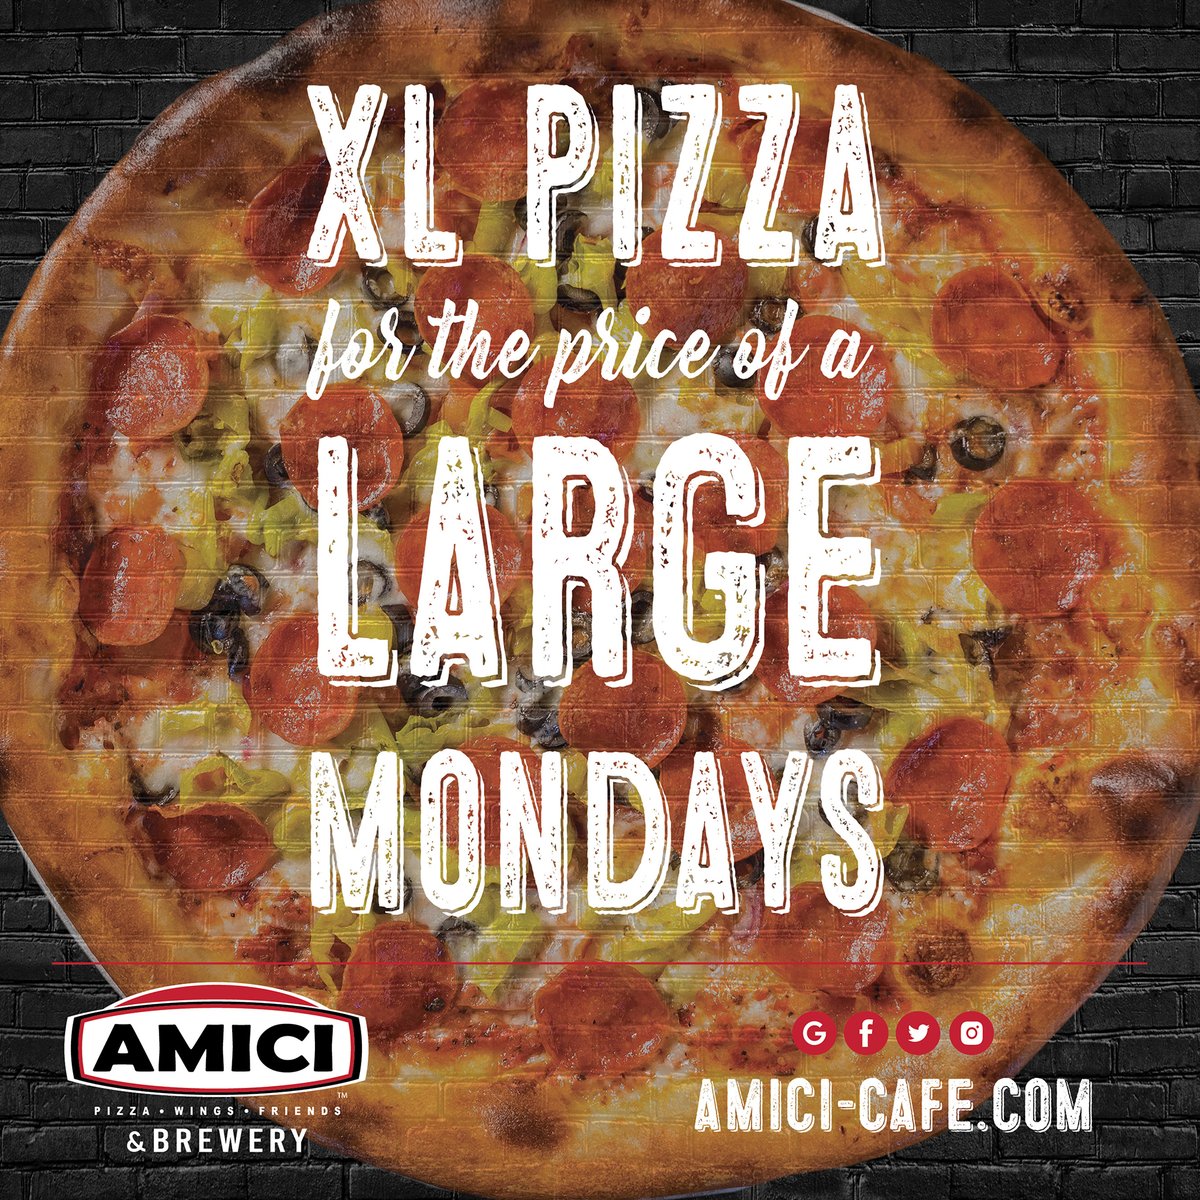 Start your week with a slice of happiness! Join us at #Amici every Monday and upgrade your pizza game with an XL pie for the cost of a large. Treat yourself because Mondays deserve a delicious twist! 🍕😋 

#XLDeal #PizzaPerfection #AmiciMondays #pizzaparty #foodie